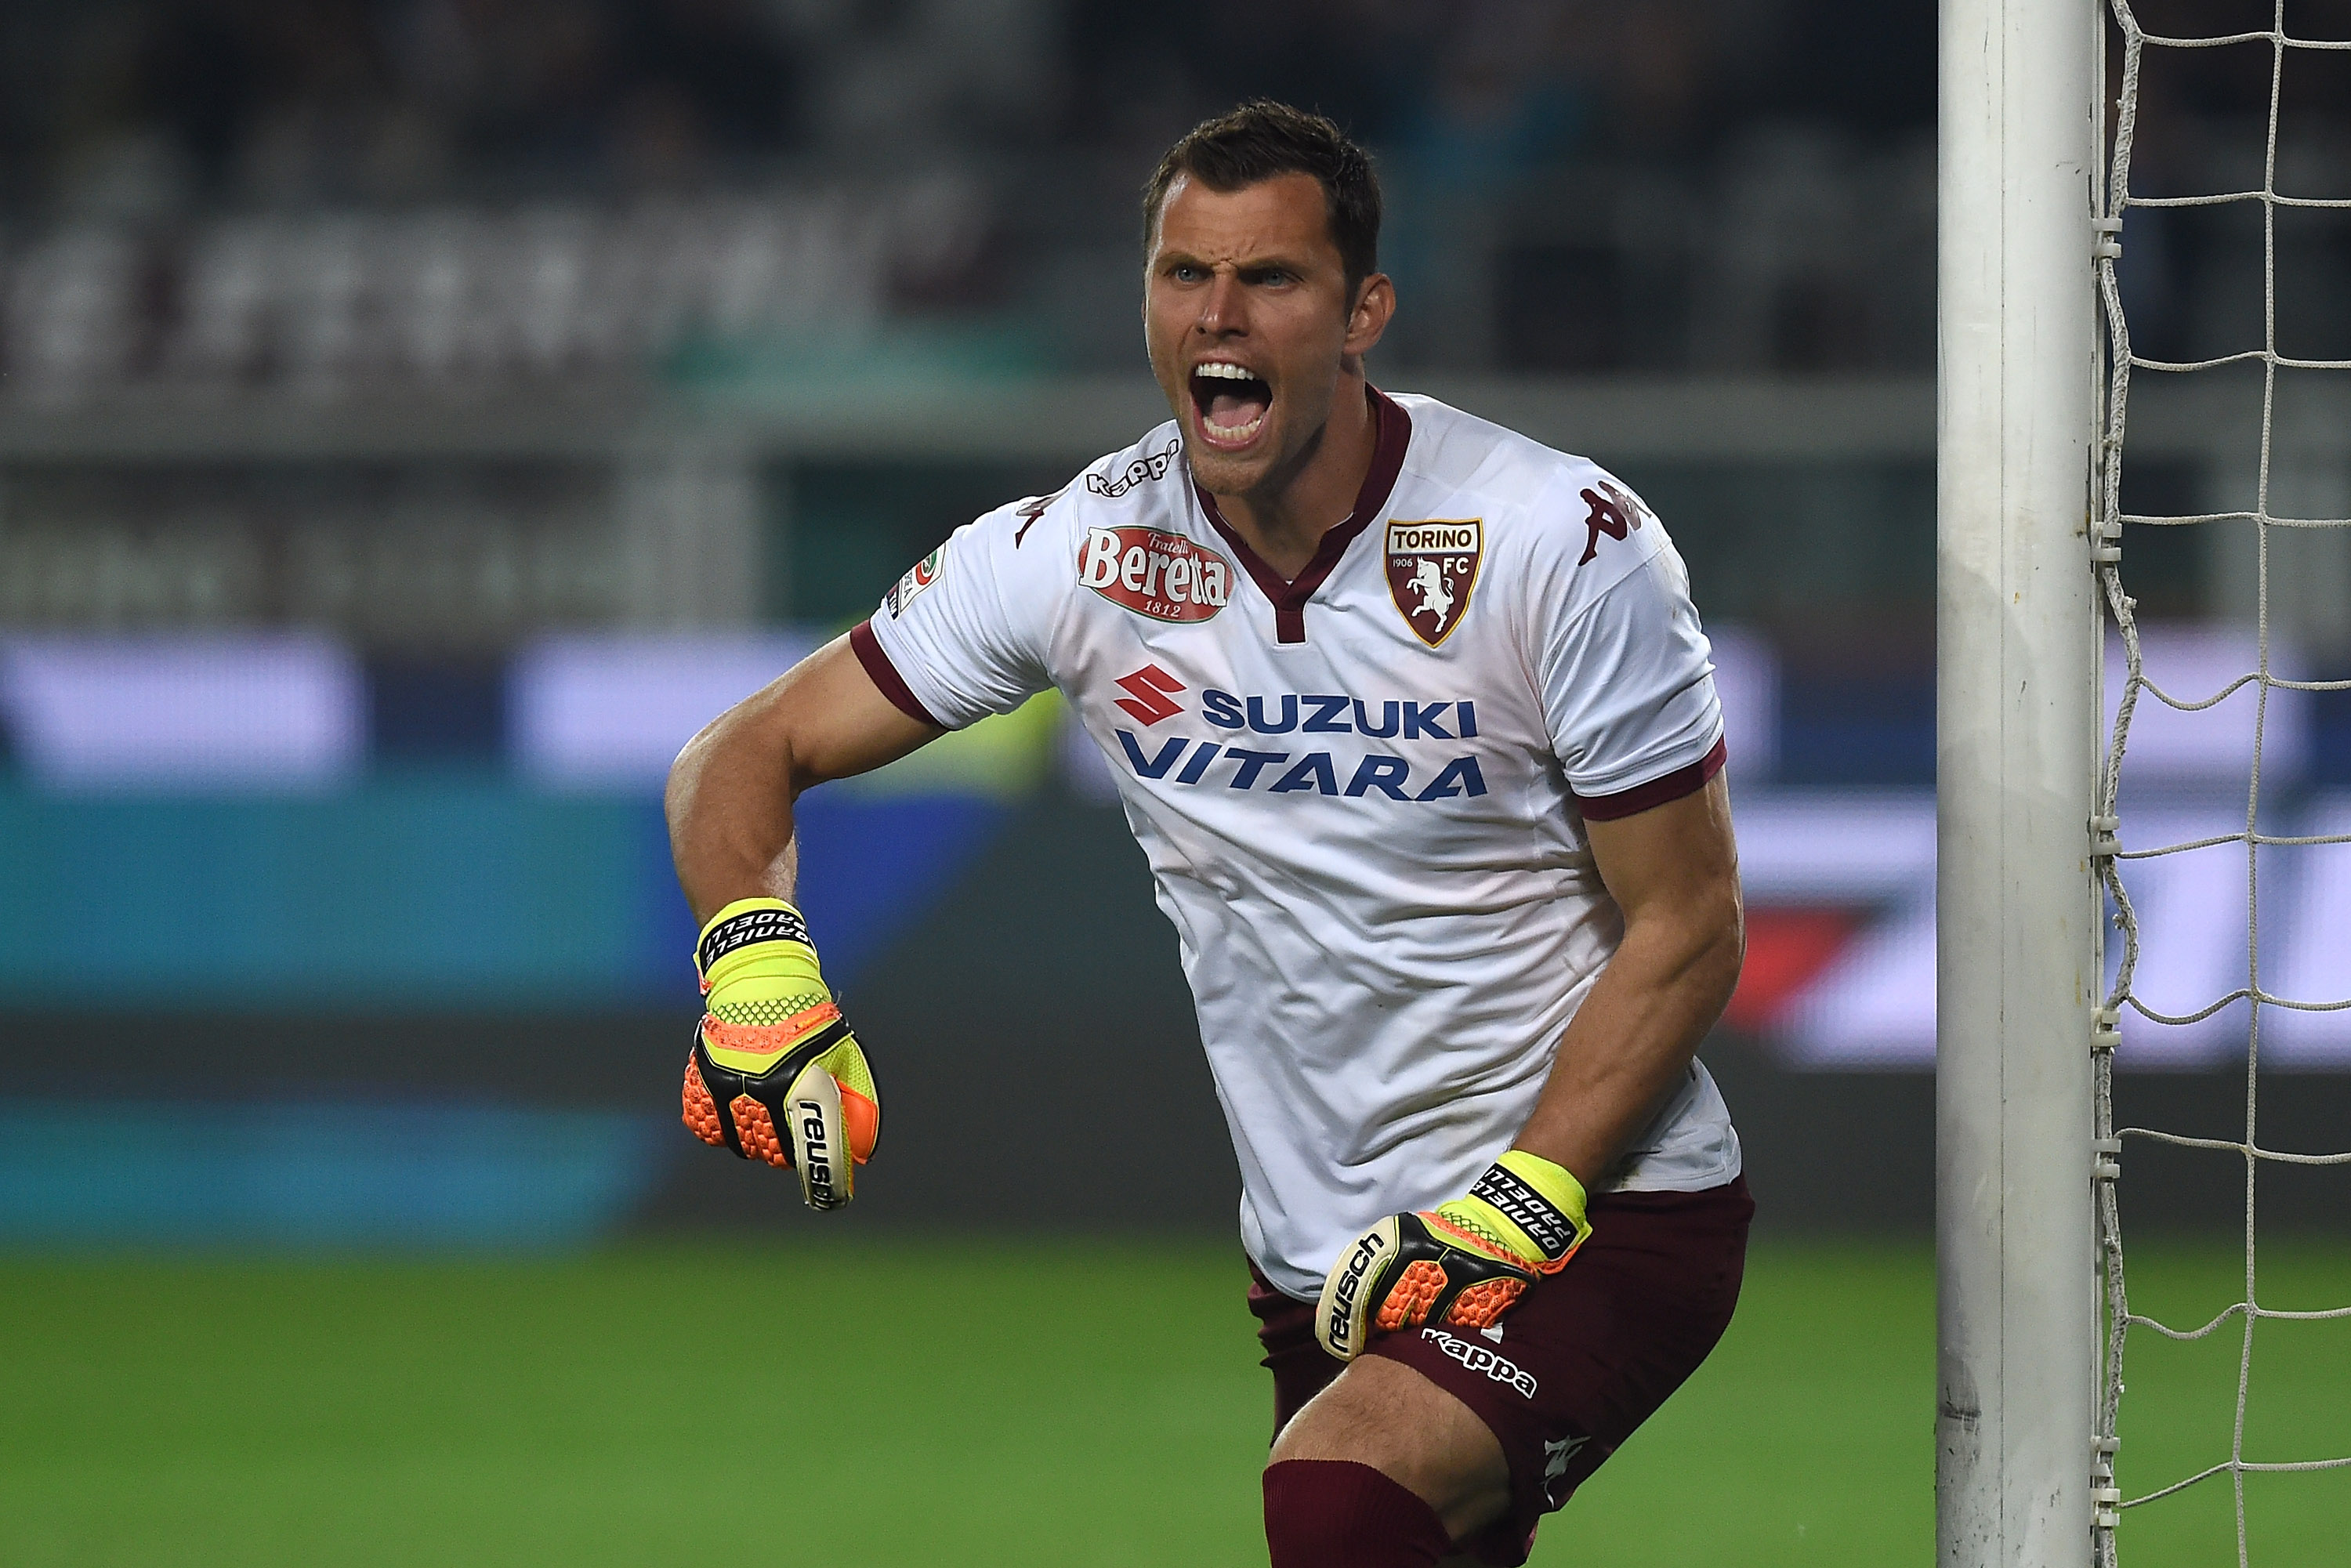 Padelli: “I will miss Torino, I got a lot of satisfaction here”